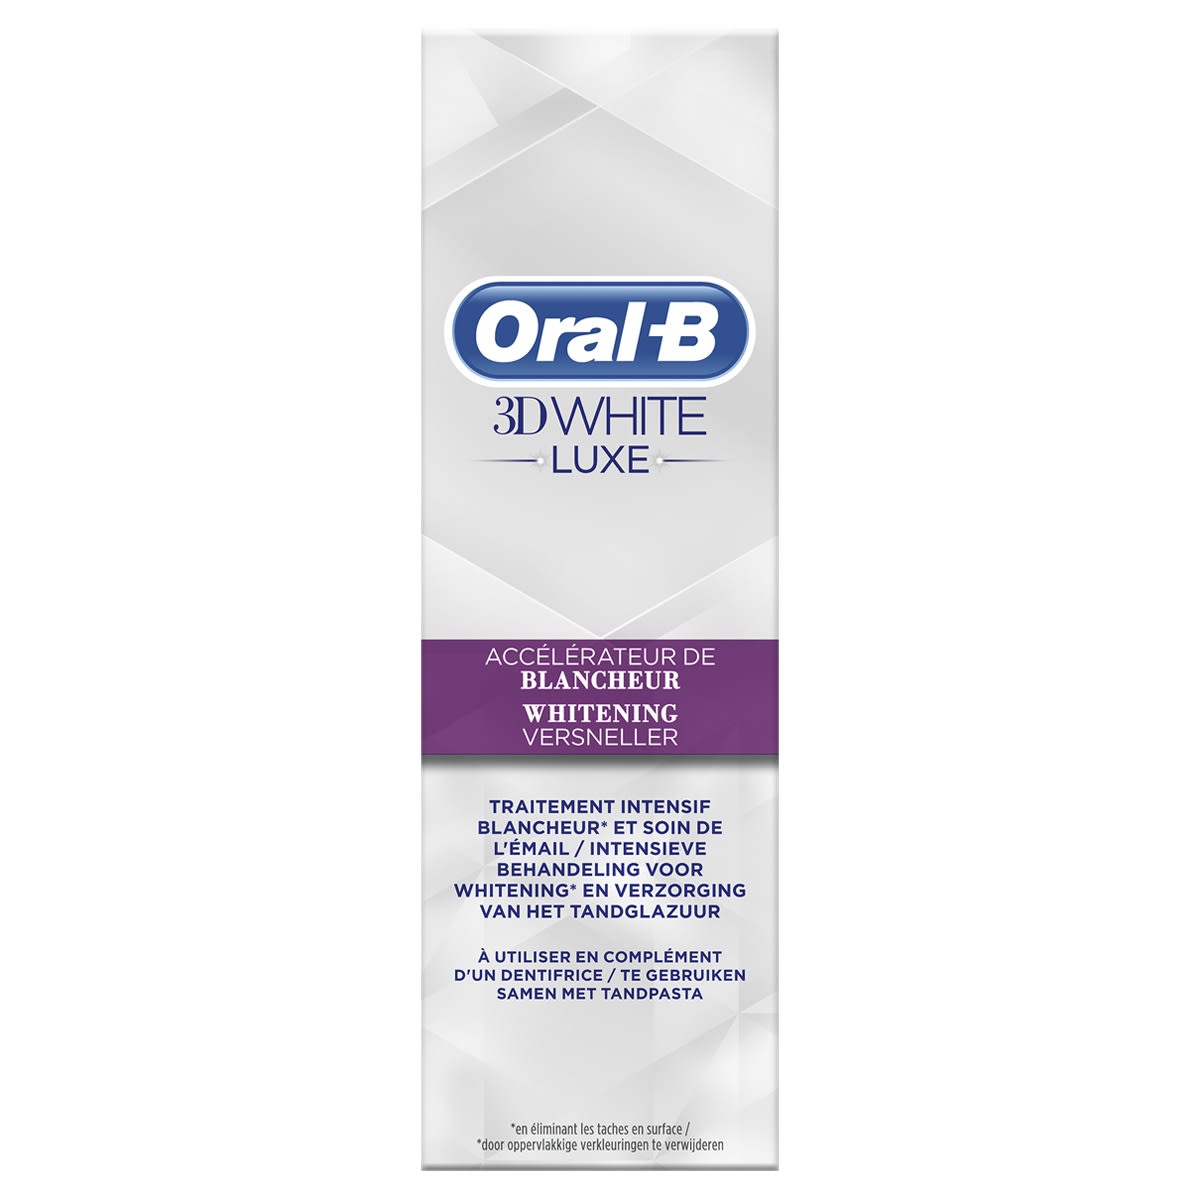 D white отзывы. Oral b 3d White Luxe. Oral b 3d White Whitening treatment two Step паста. Oral_b 3dwhite отбел. Oral_b 3dwhite отбел 40 сред.